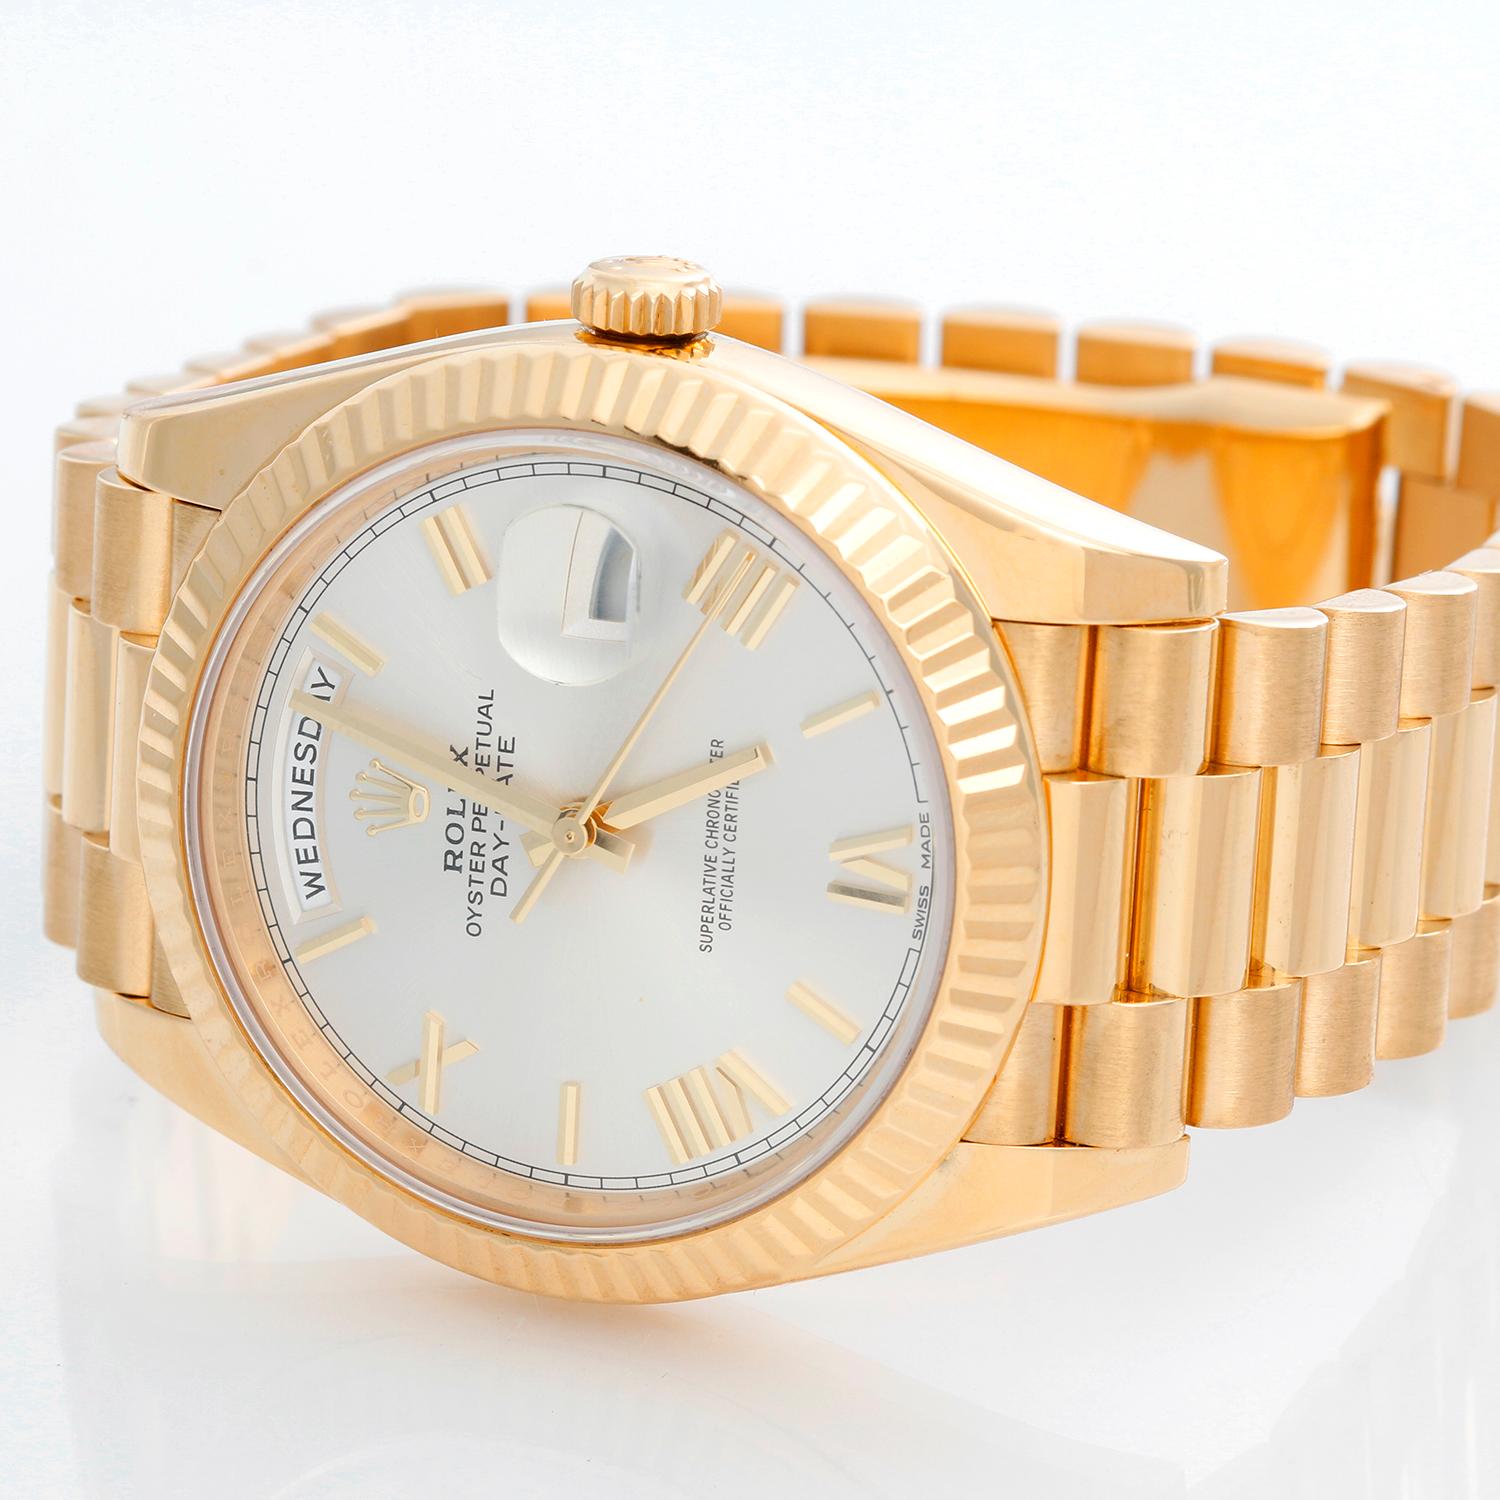 Rolex Day-Date II President 18k Yellow Gold Men's 40mm Watch 228238 - Automatic winding, 31 jewels, sapphire crystal, with day and date. 18K Yellow gold; fluted bezel  (40mm diameter). Black dial with baguette  hour markers. 18k yellow gold